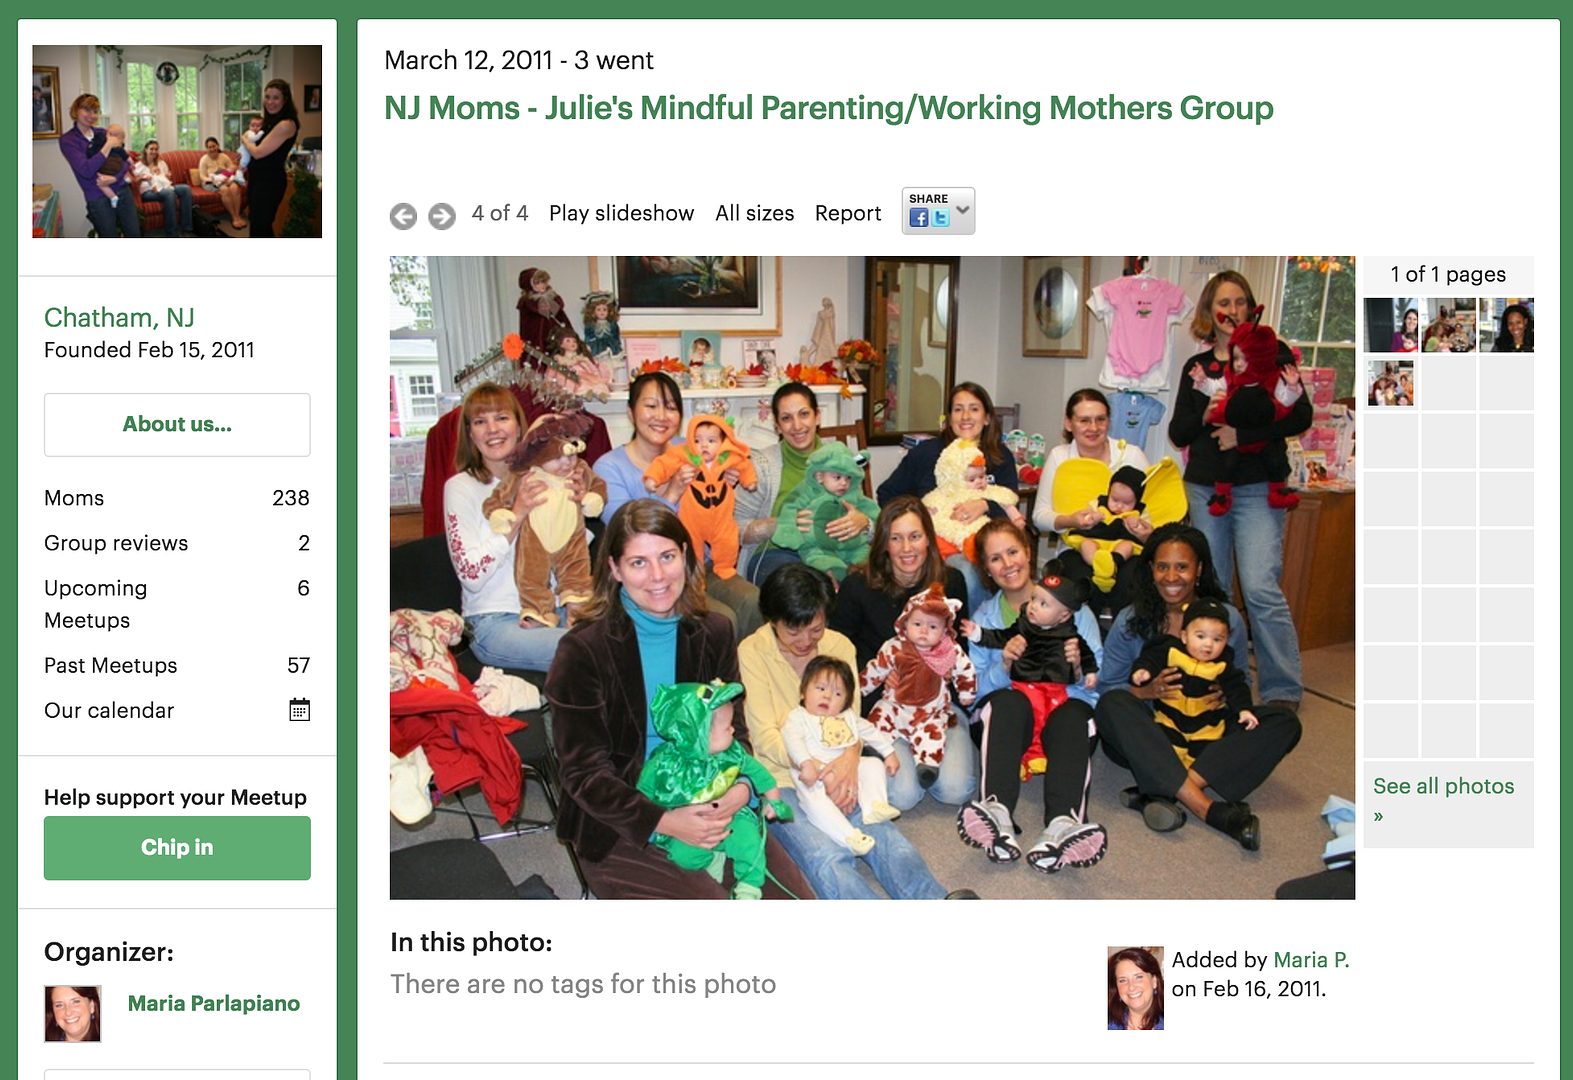 Tips for breastfeeding moms returning to work: Great resources for meetups and support groups with like-minded moms